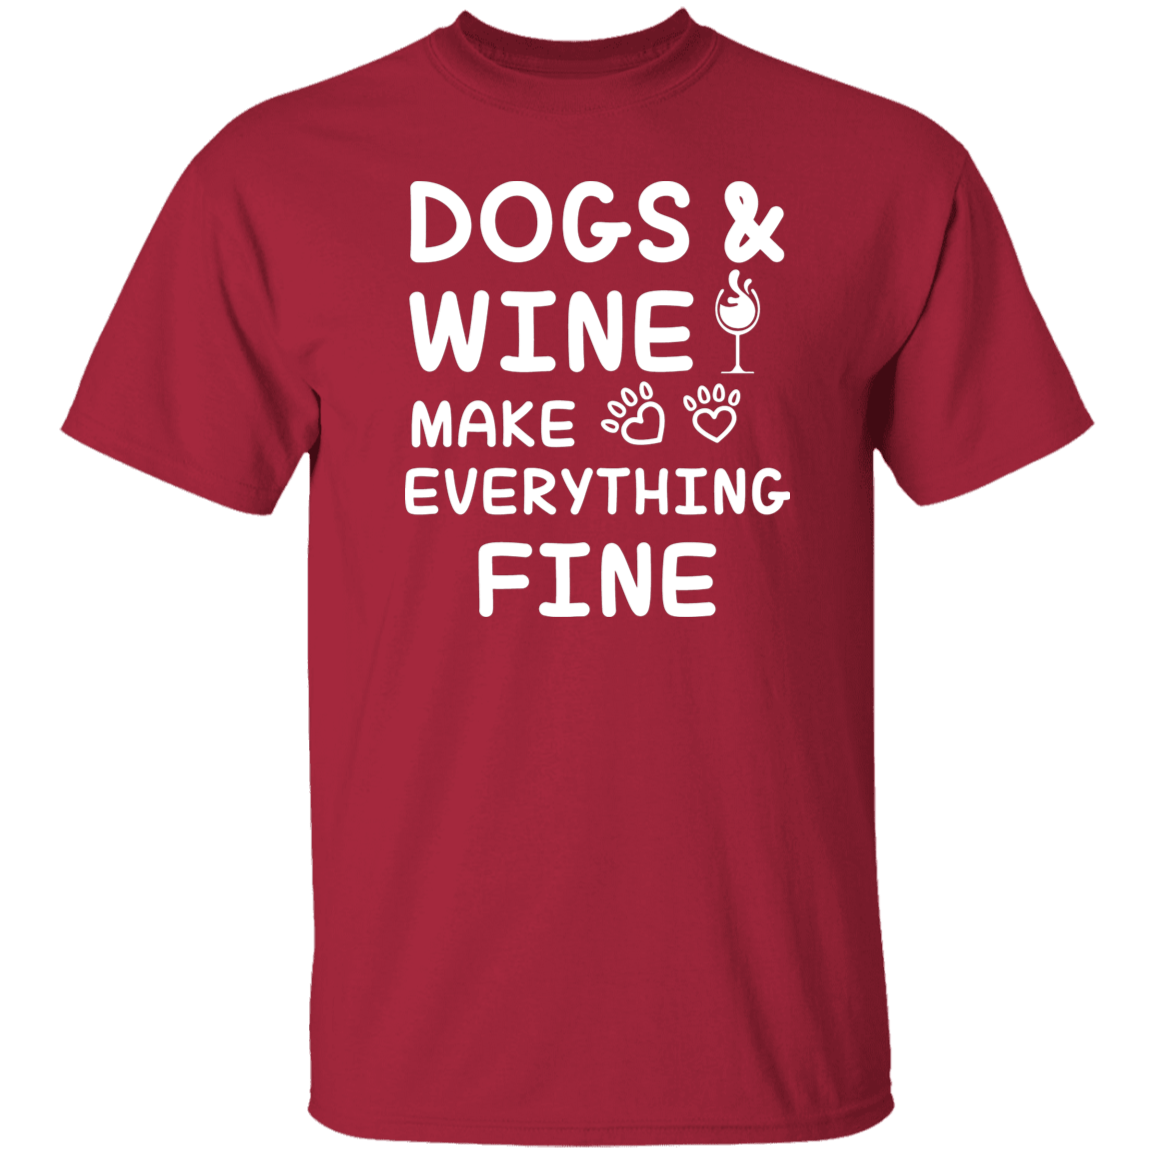 Dogs And Wine Make Everything Fine - T Shirt.